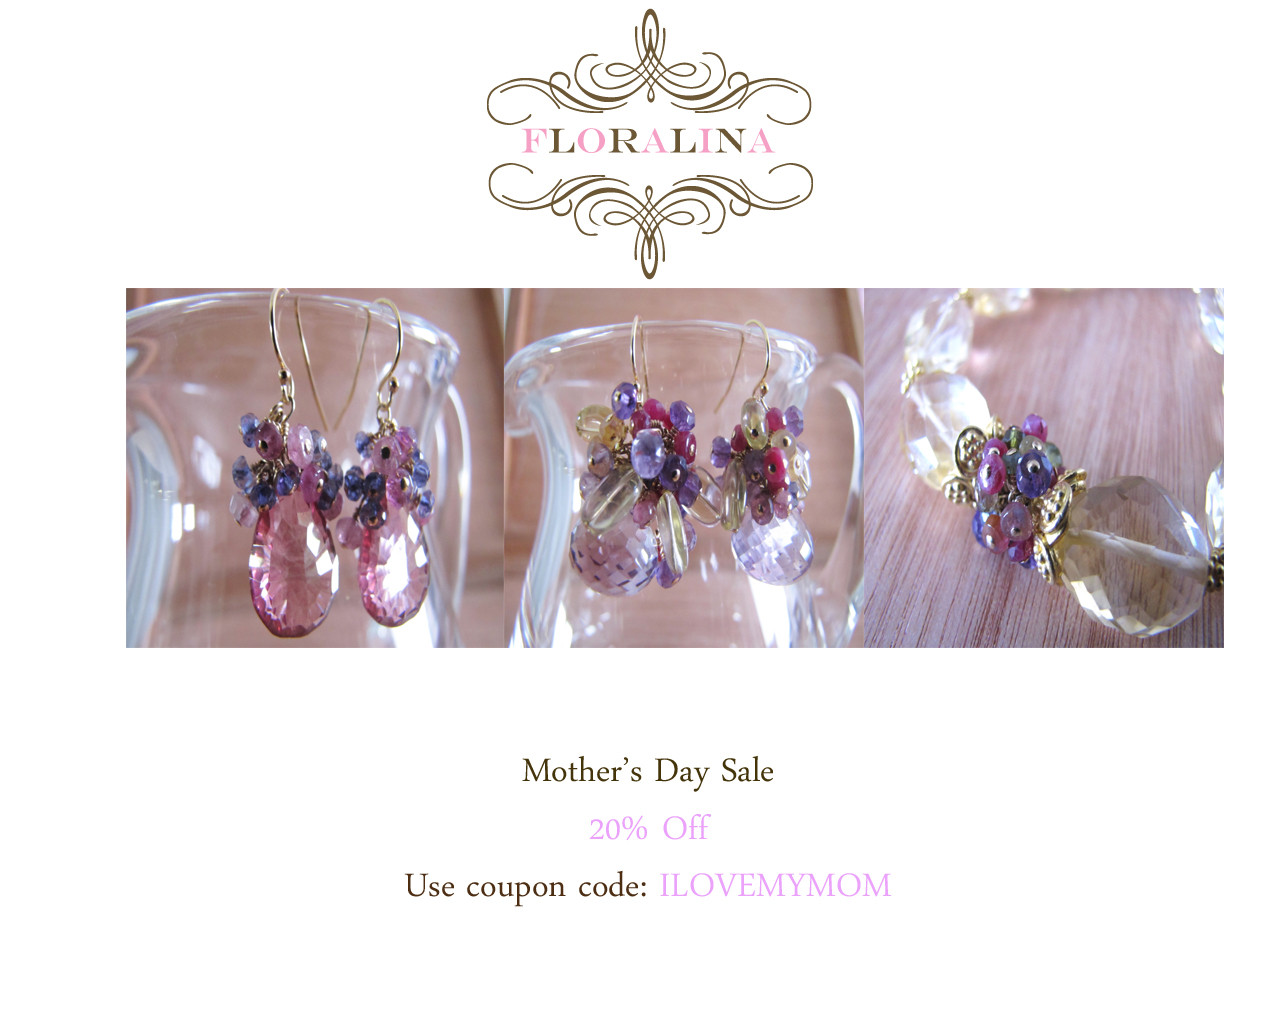 Mothers Day Jewelry Ideas
 FLORALINA Mother s Day Jewelry Gift Ideas